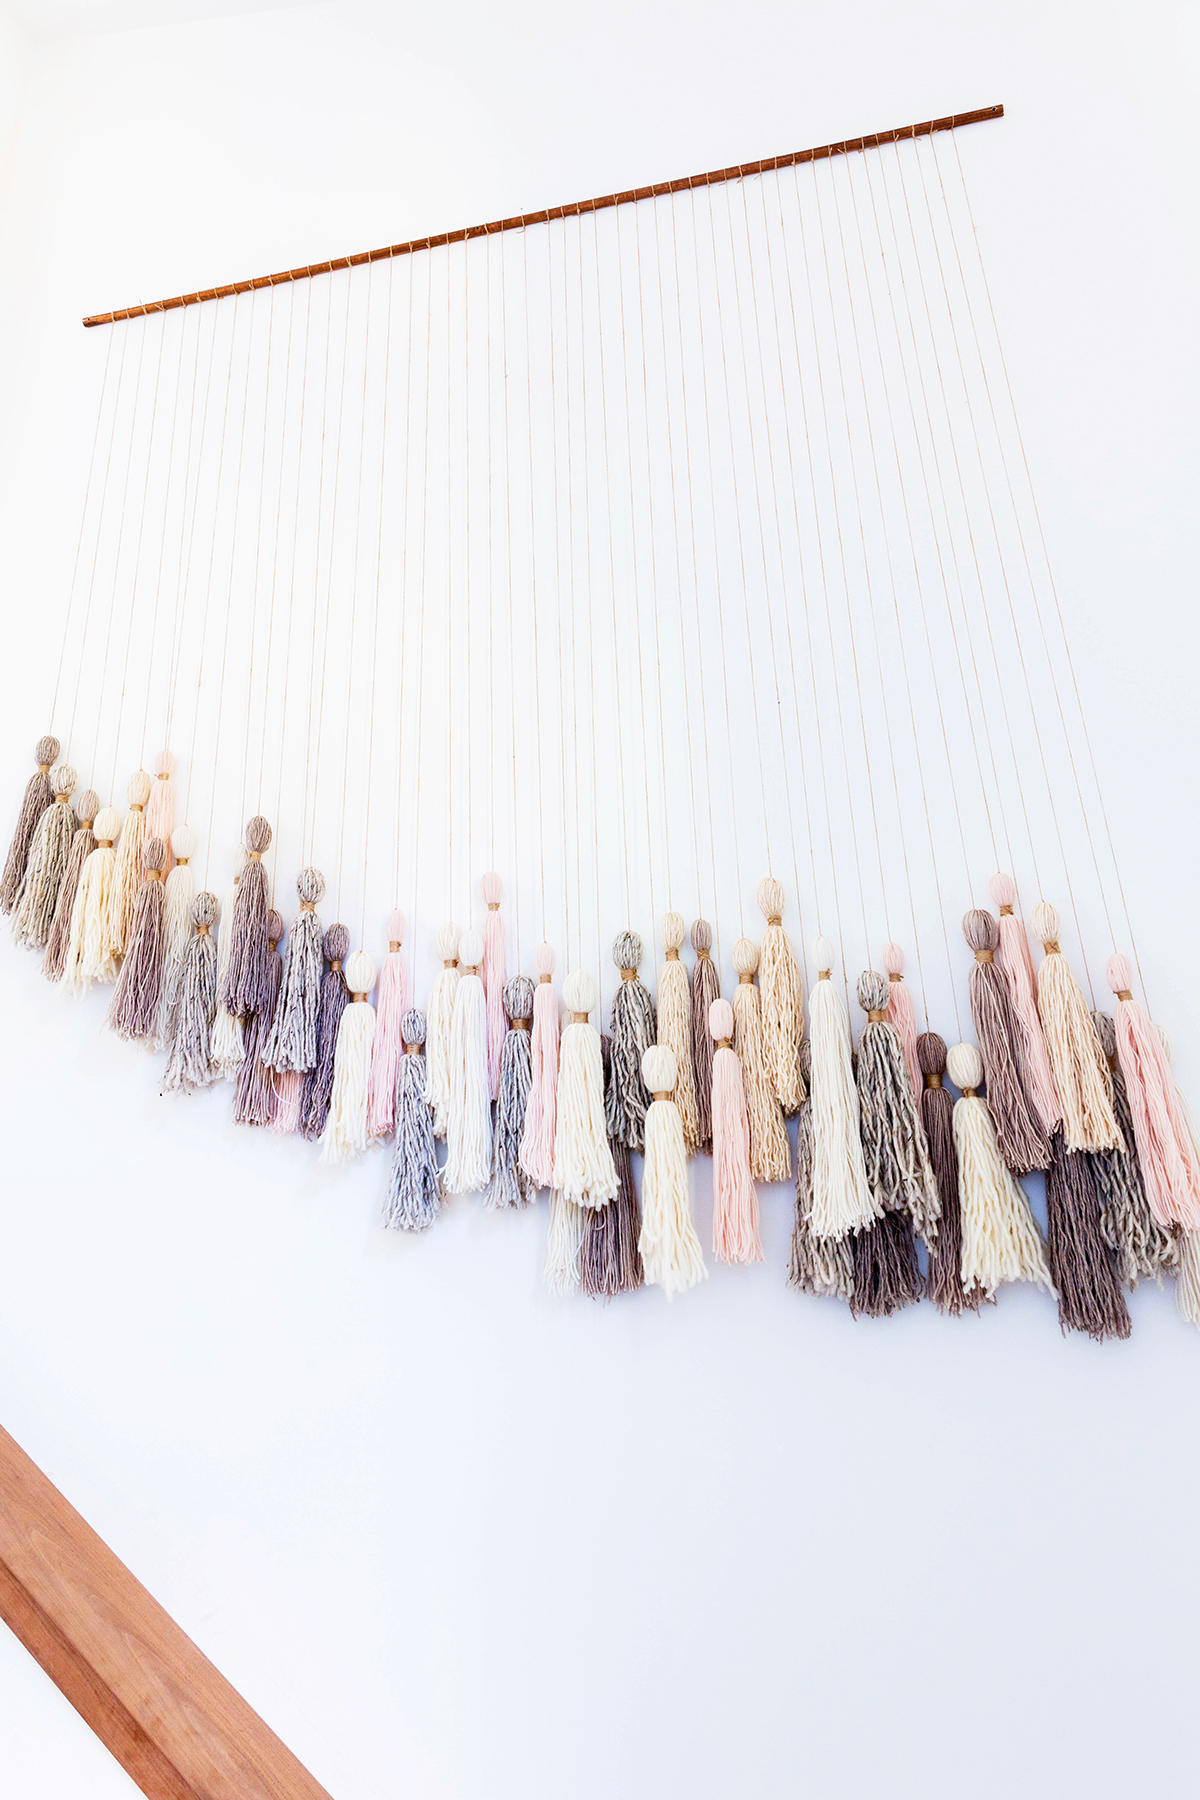 Tassel wall hanging from Honestly WTF